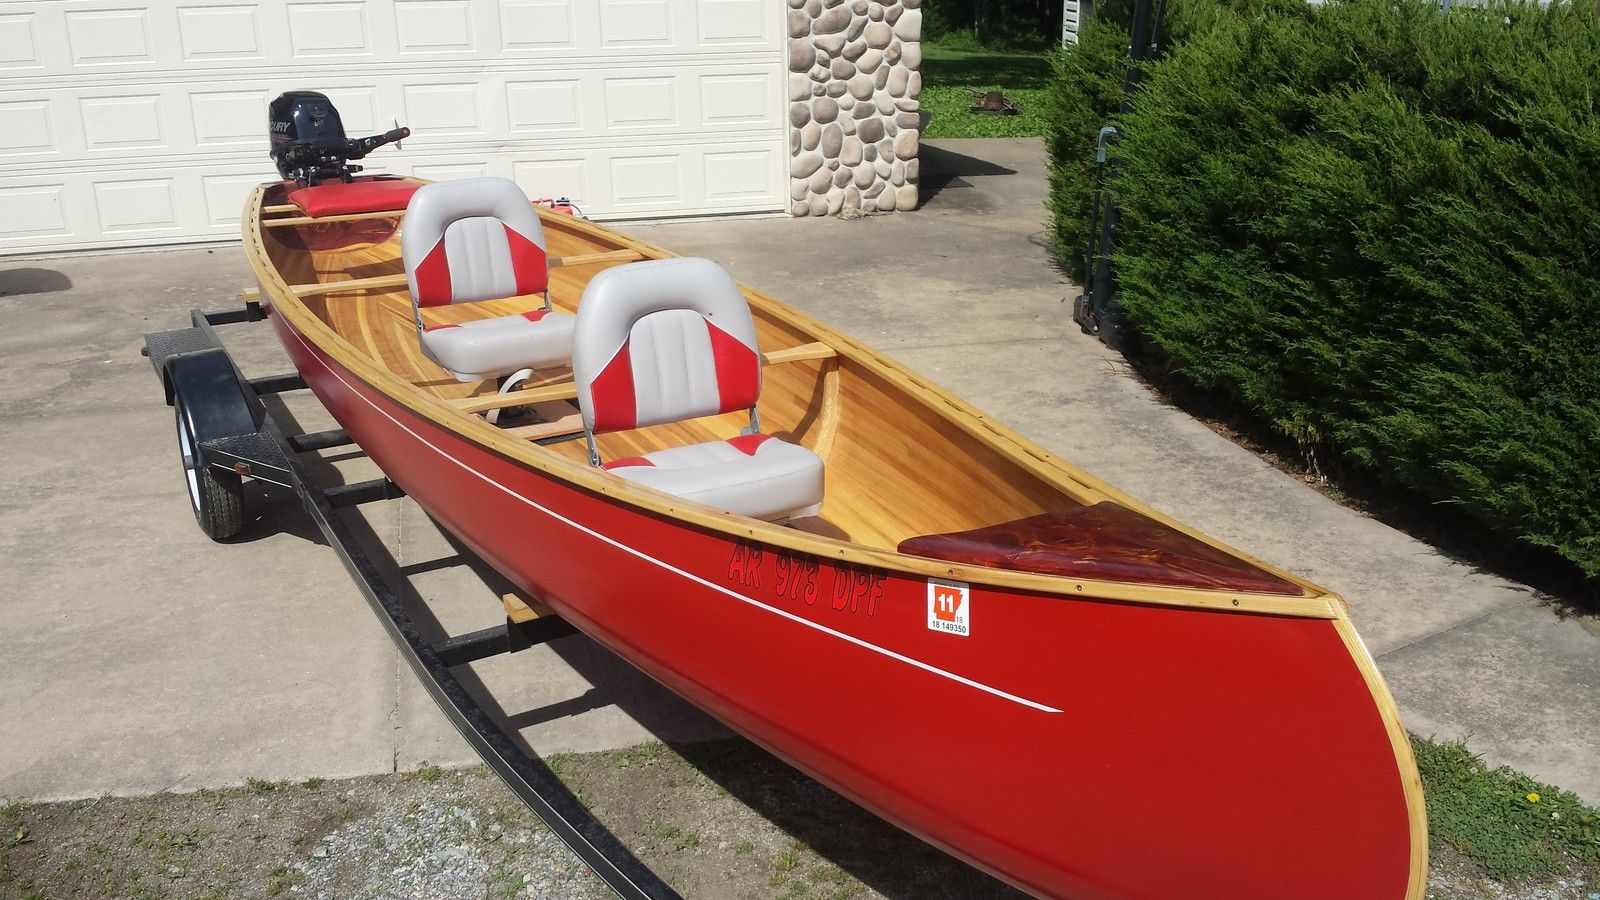 Grand Laker Home Built 2016 for sale for $9,500 - Boats ...